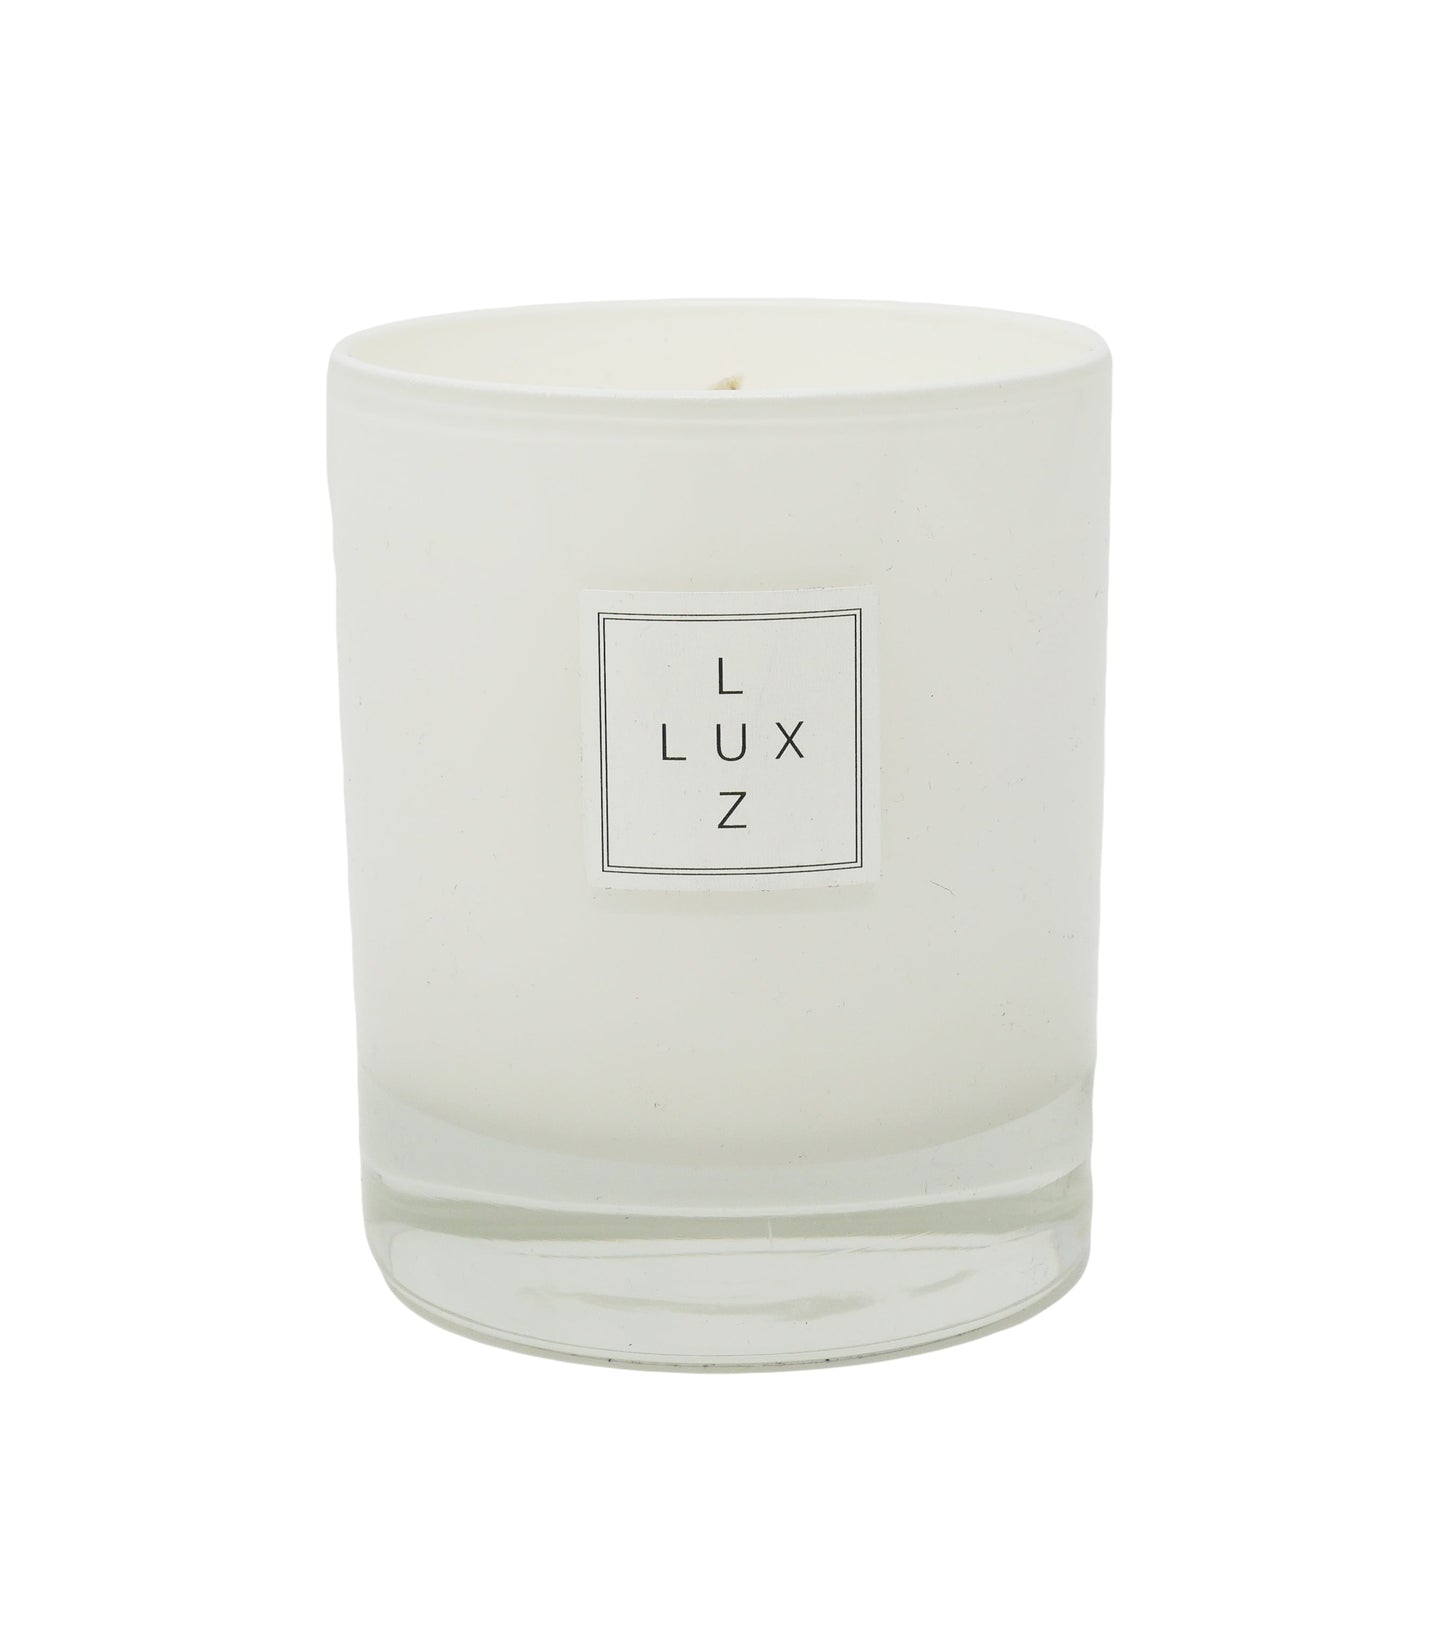 Lime & basil scented candle